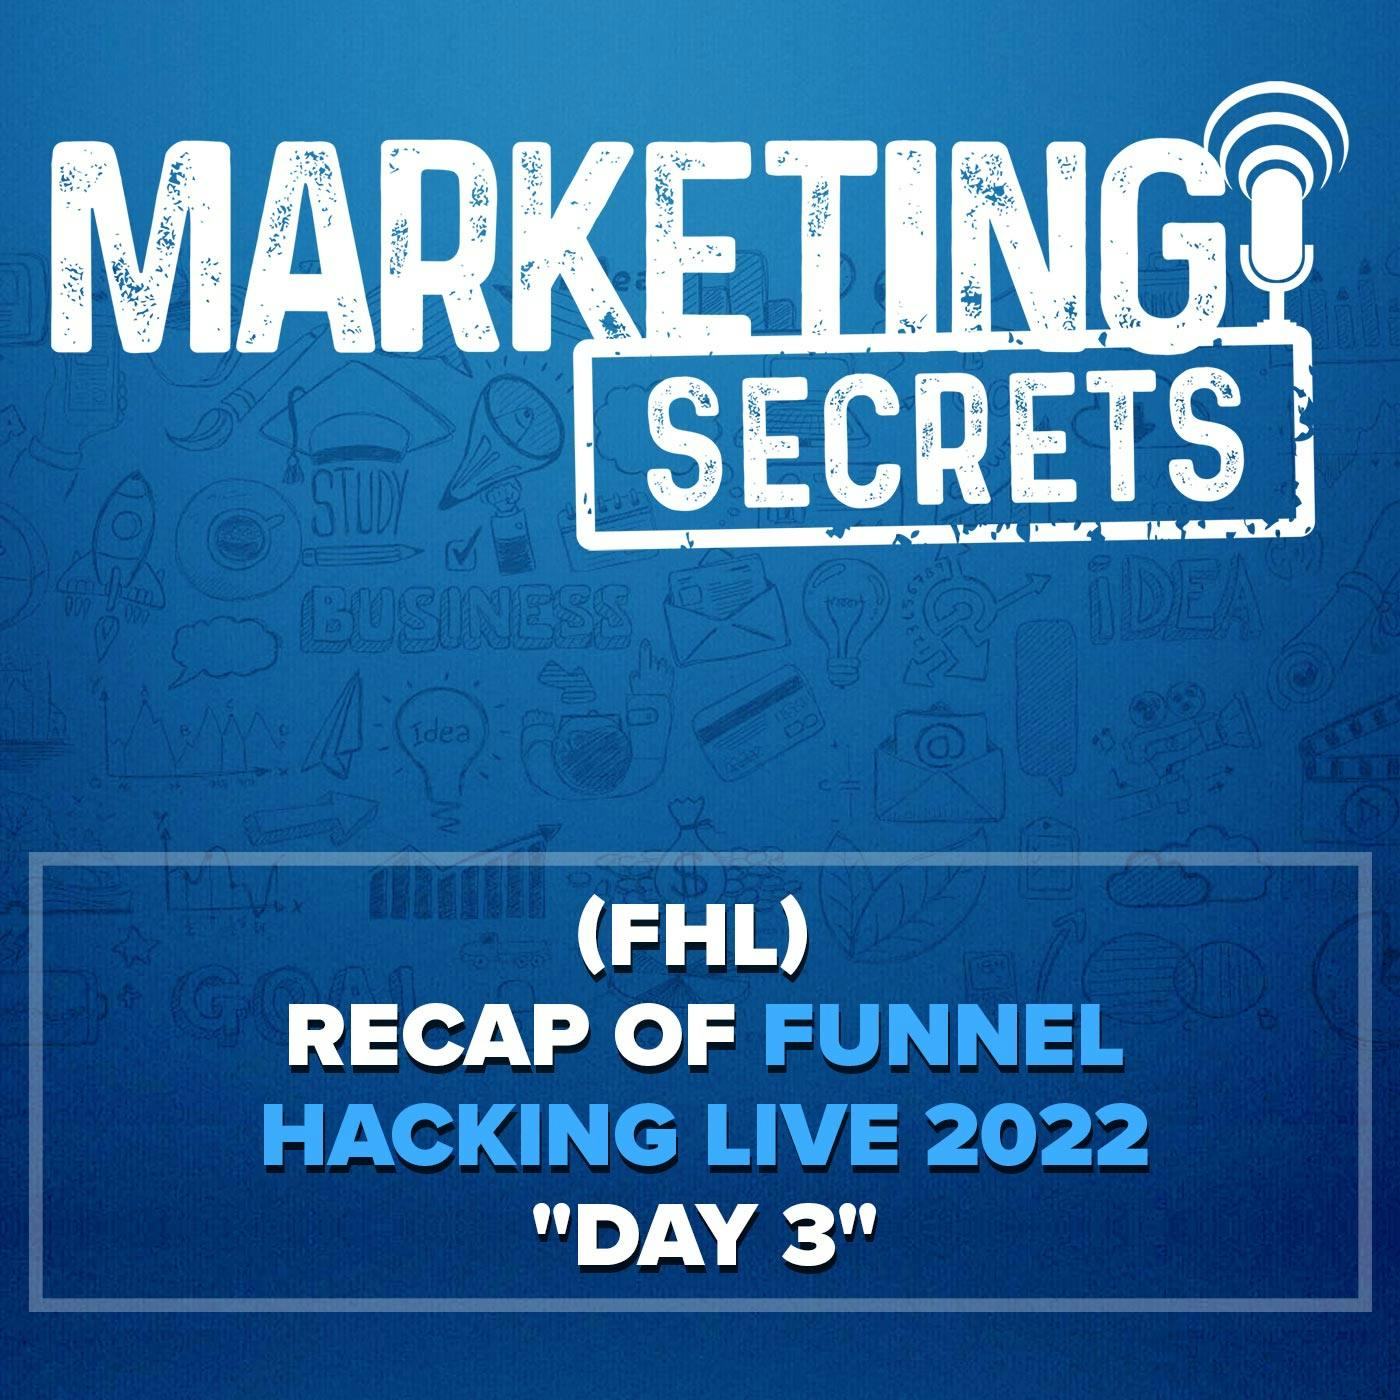 (FHL) Recap of Funnel Hacking Live 2022 ”Day 3”